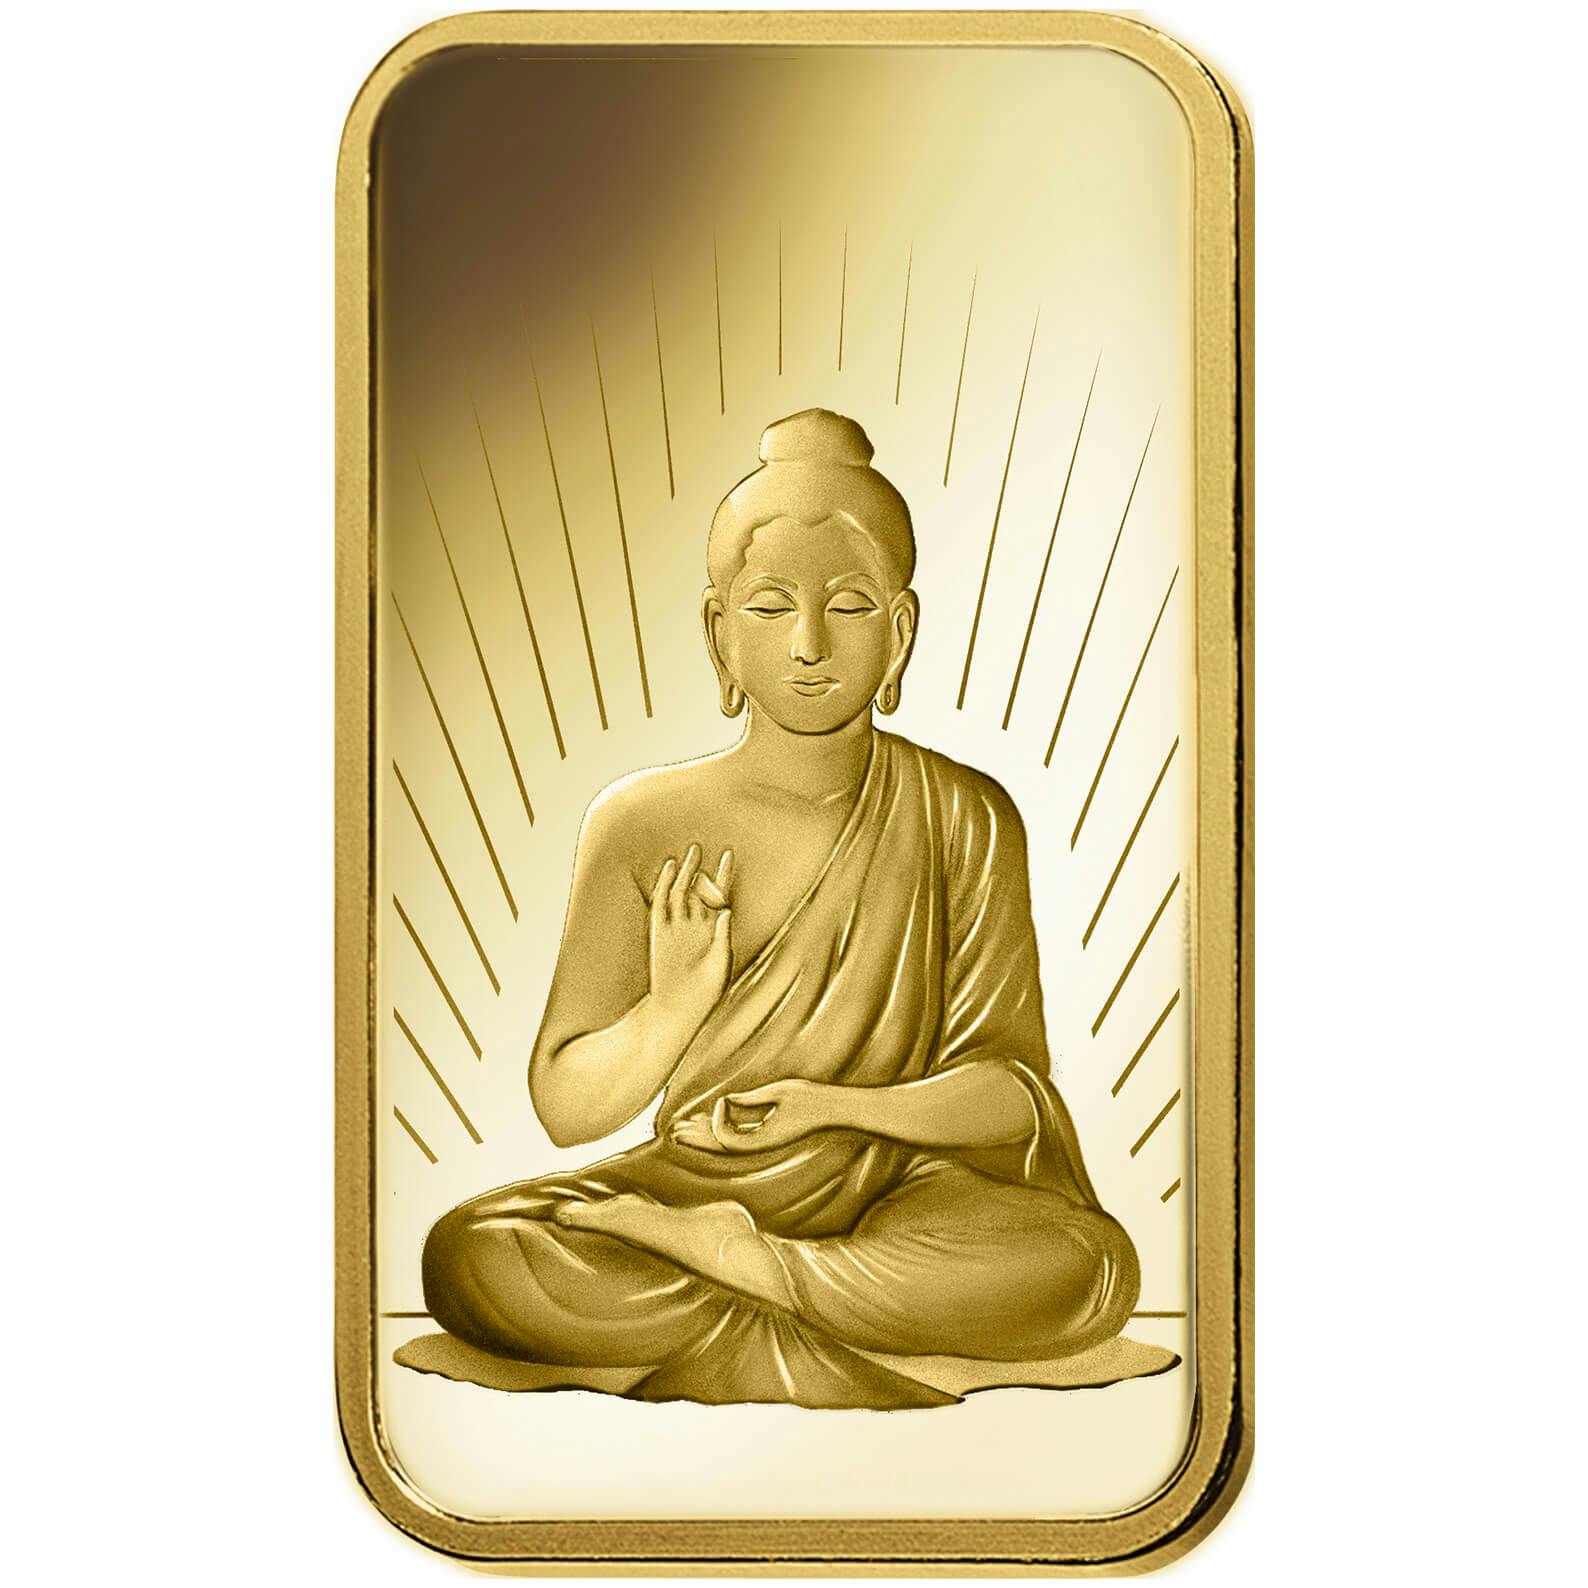 Achat d'or, 10 gram d'or pur Buddha - PAMP Suisse - Front 